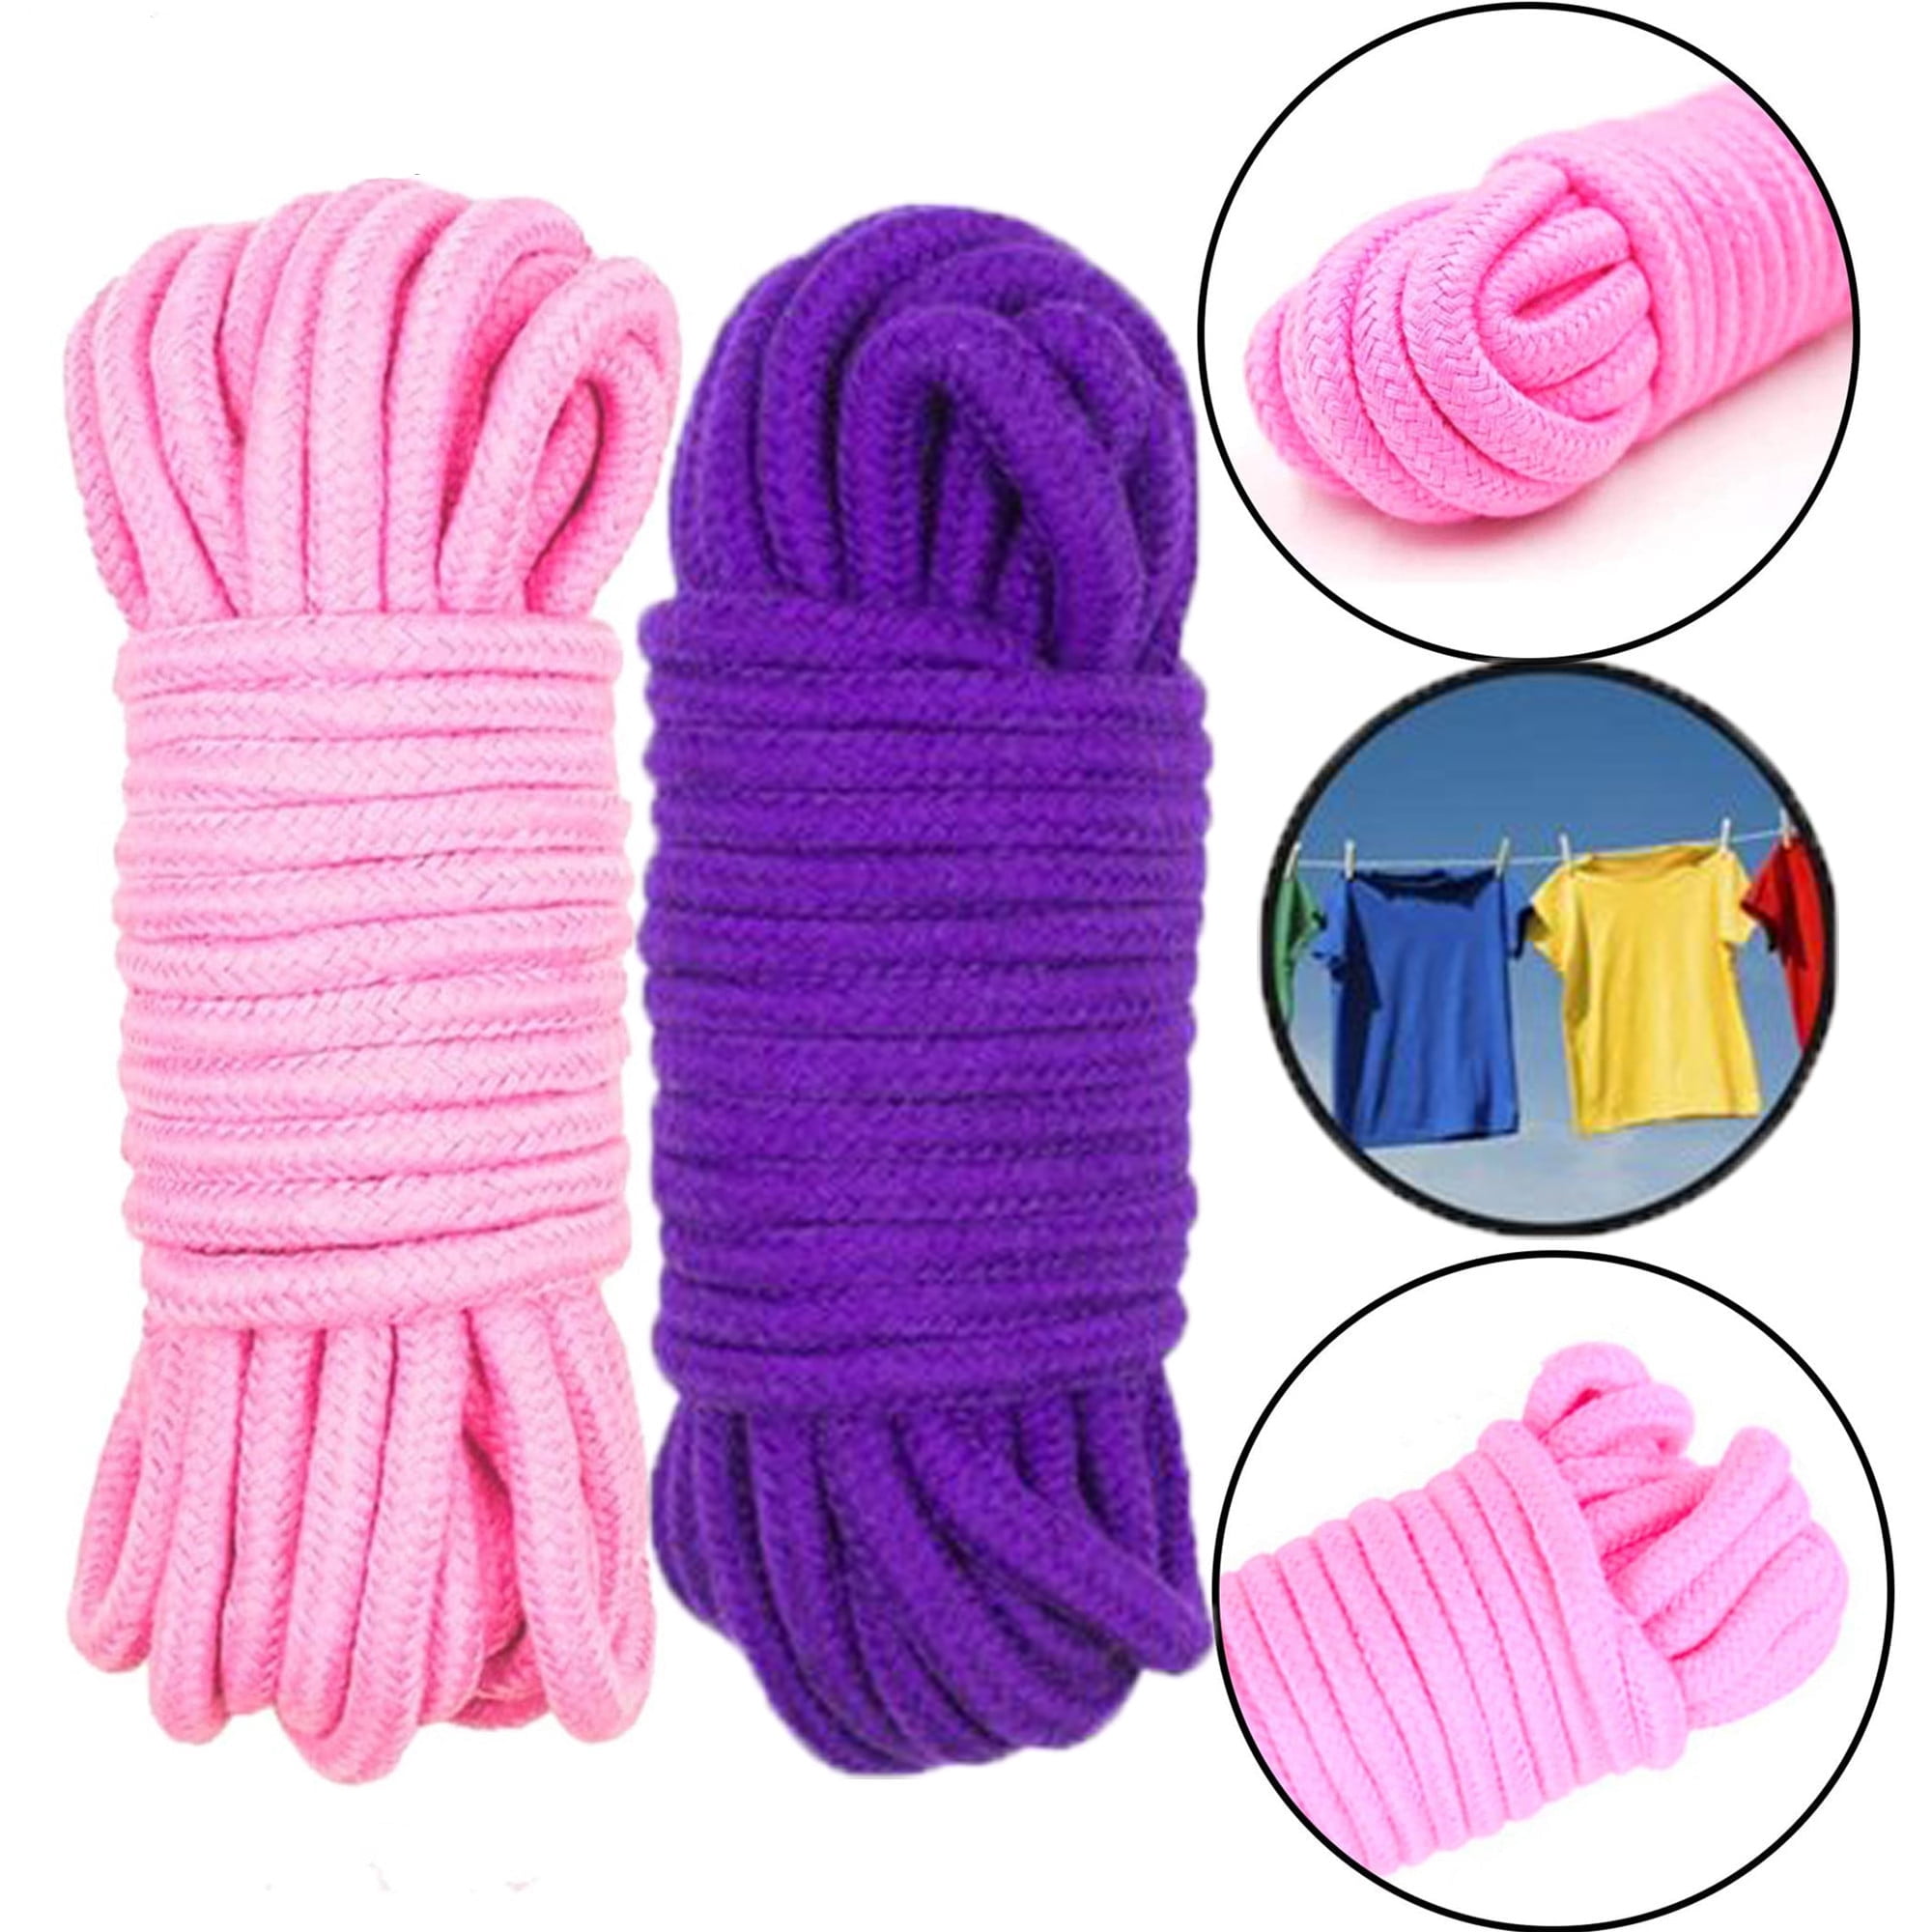 Casewin Soft Cotton Rope Binding Rope All Purpose Thick Cotton Twisted Knot  Tying Rope, 8mm Diameter, 10m Long,4PCS Pink&Purple 